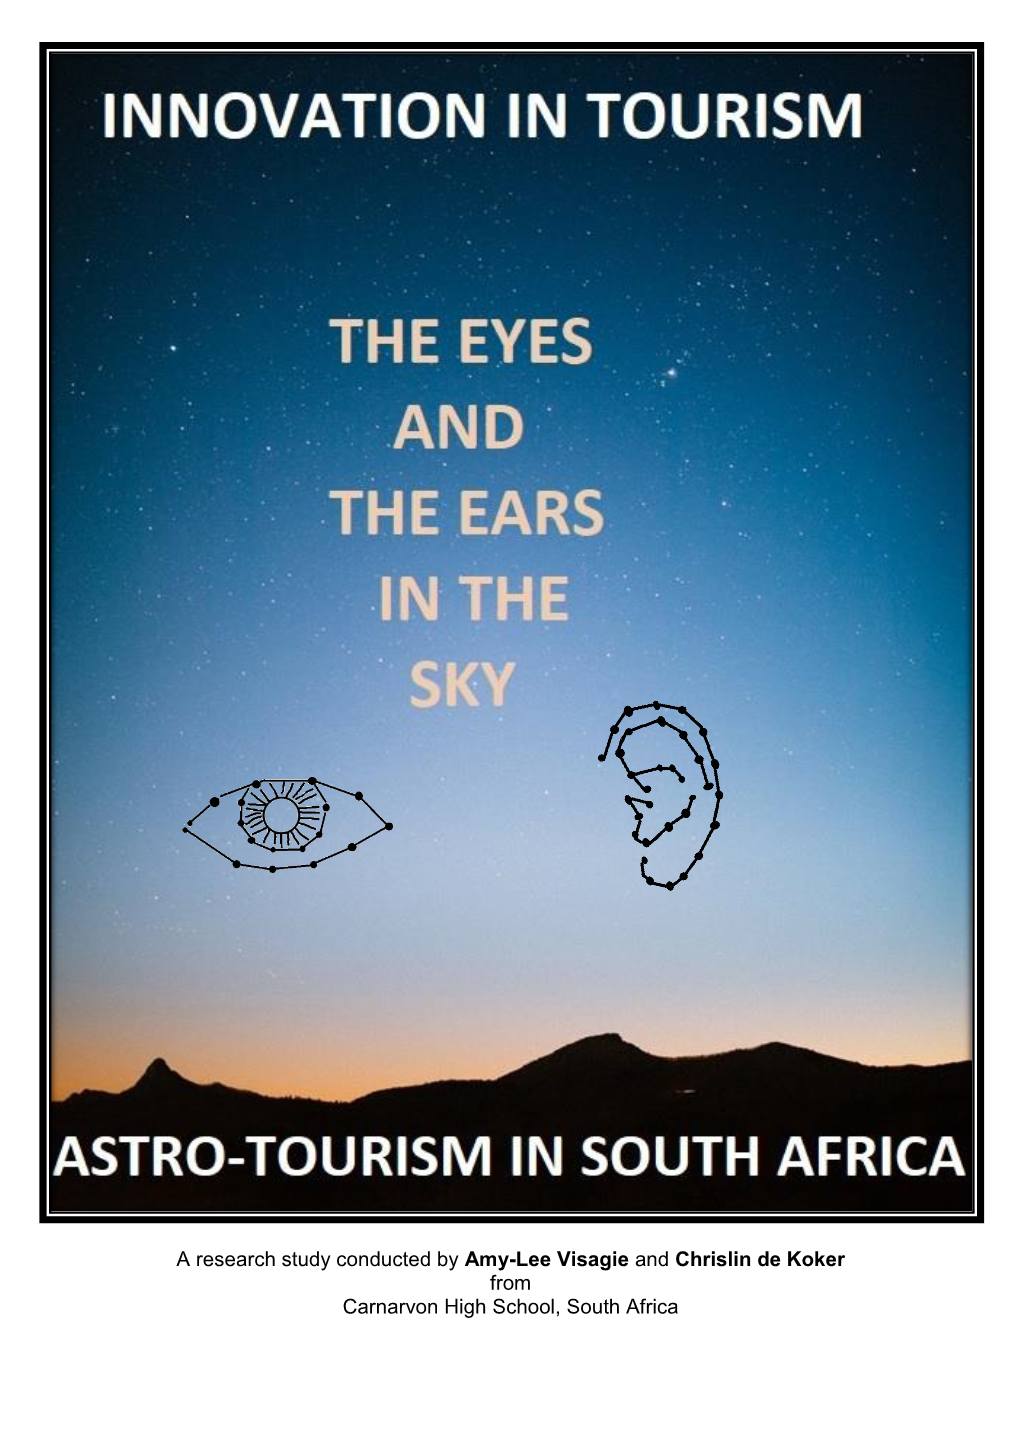 SOUTH-AFRICA-Case-Study-Astro